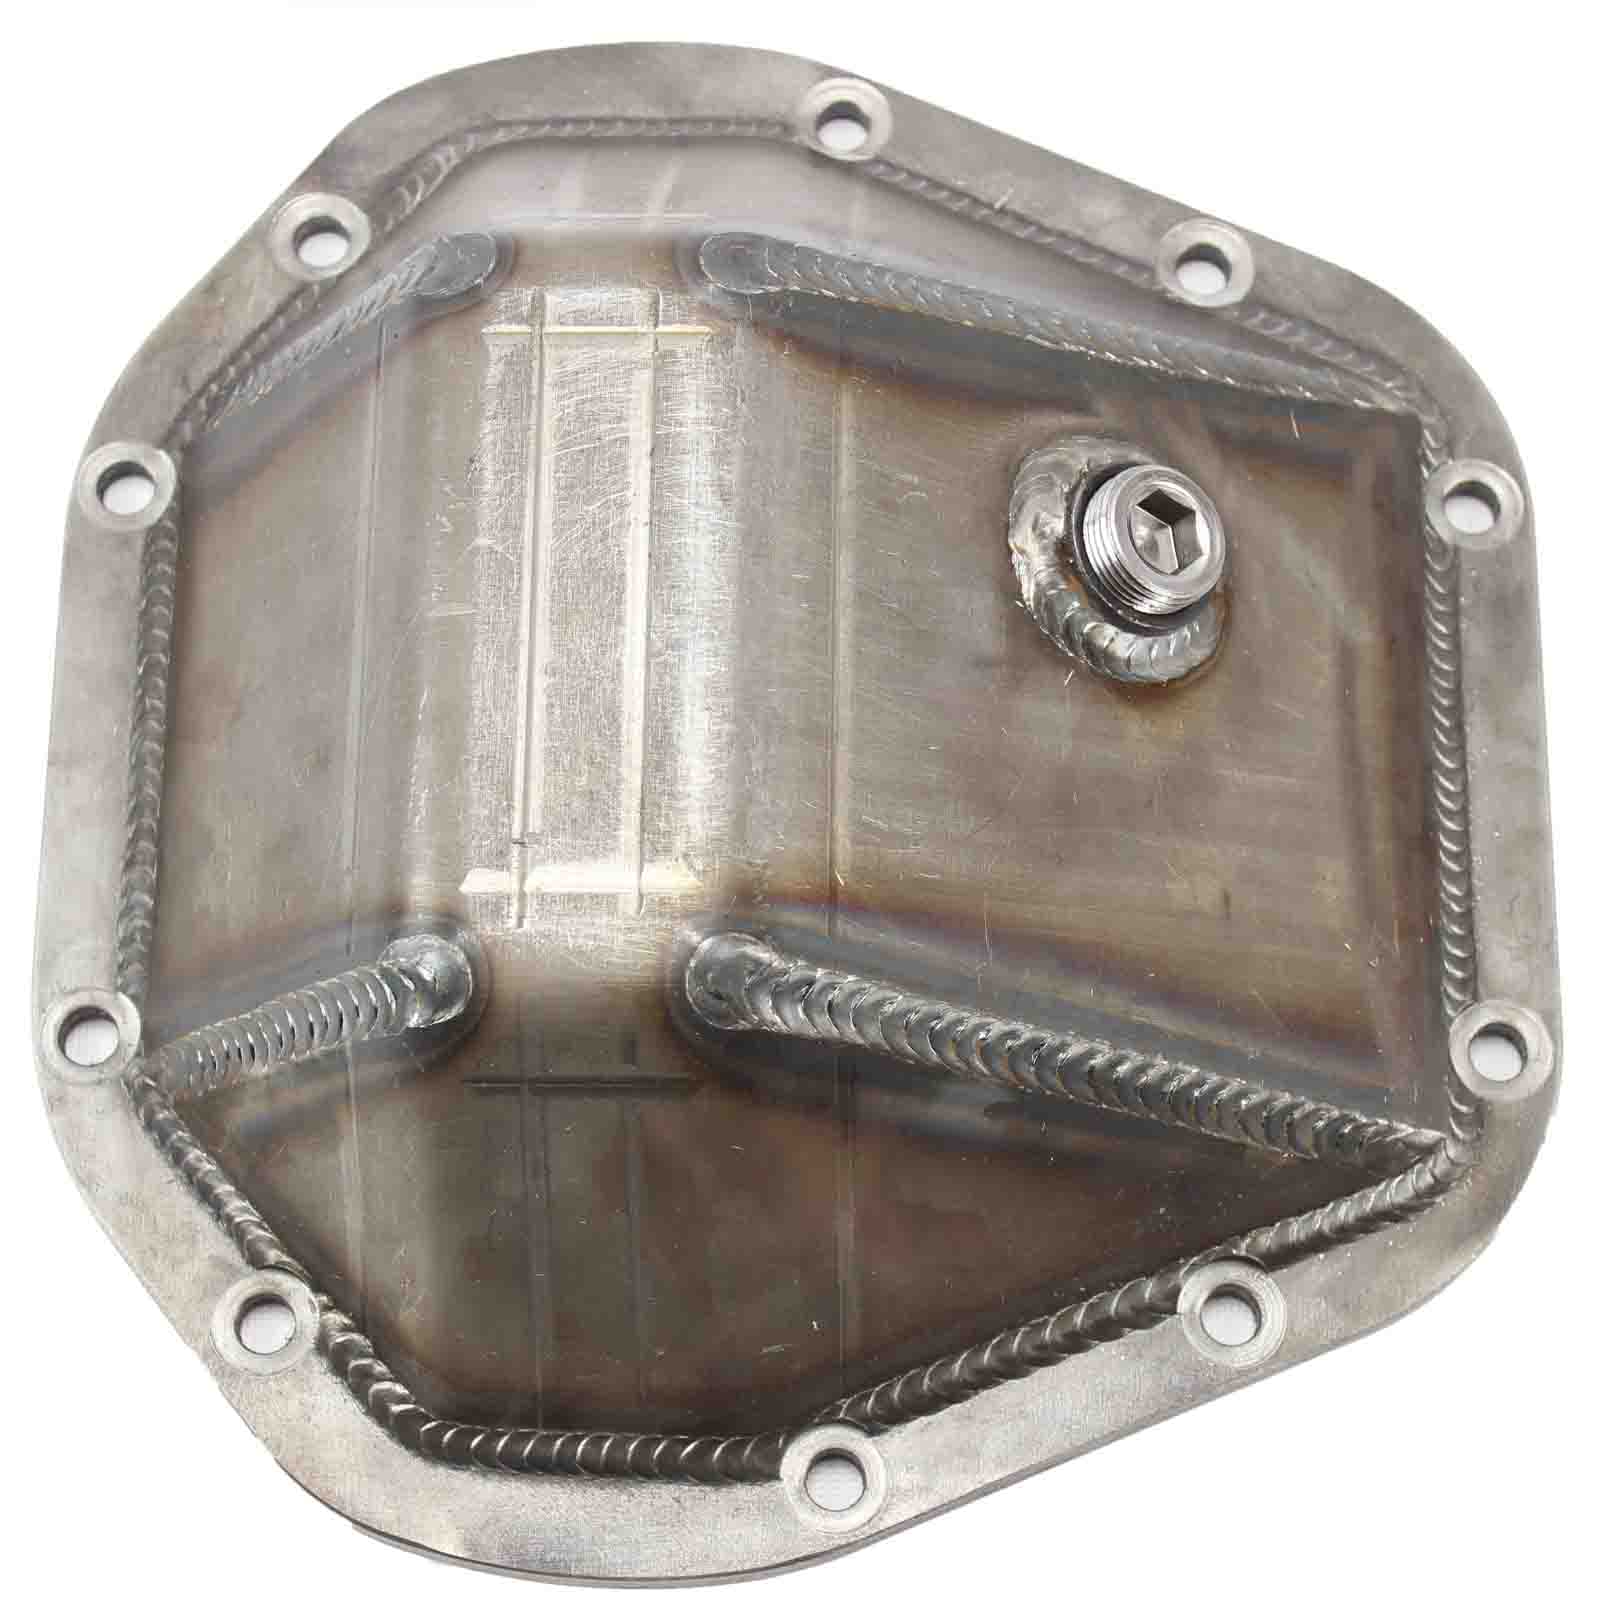 Ruffstuff Differential Cover With BOLTS TO KIT Compatible with Ford Super Duty Dana 60 